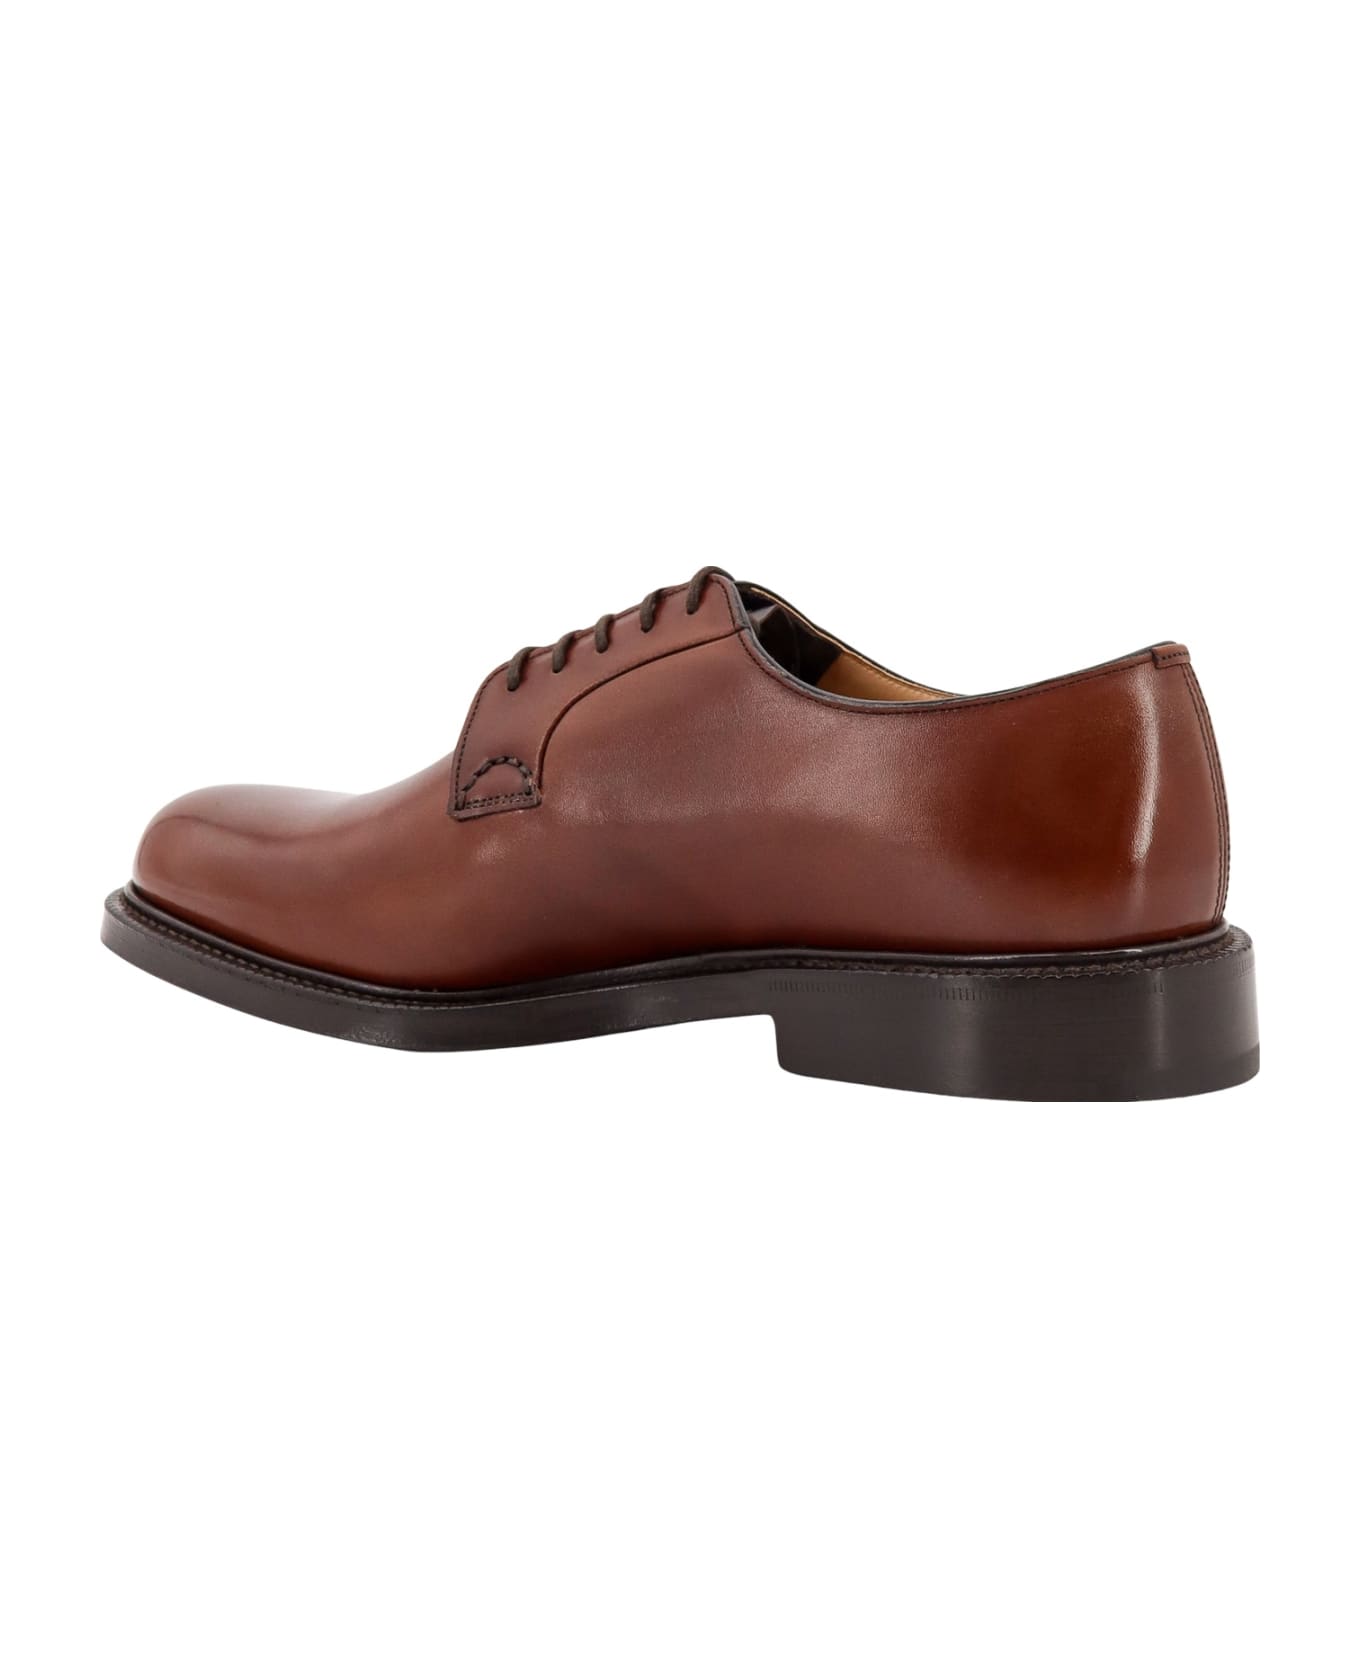 Church's Shannon Lace-up Shoe - Brown